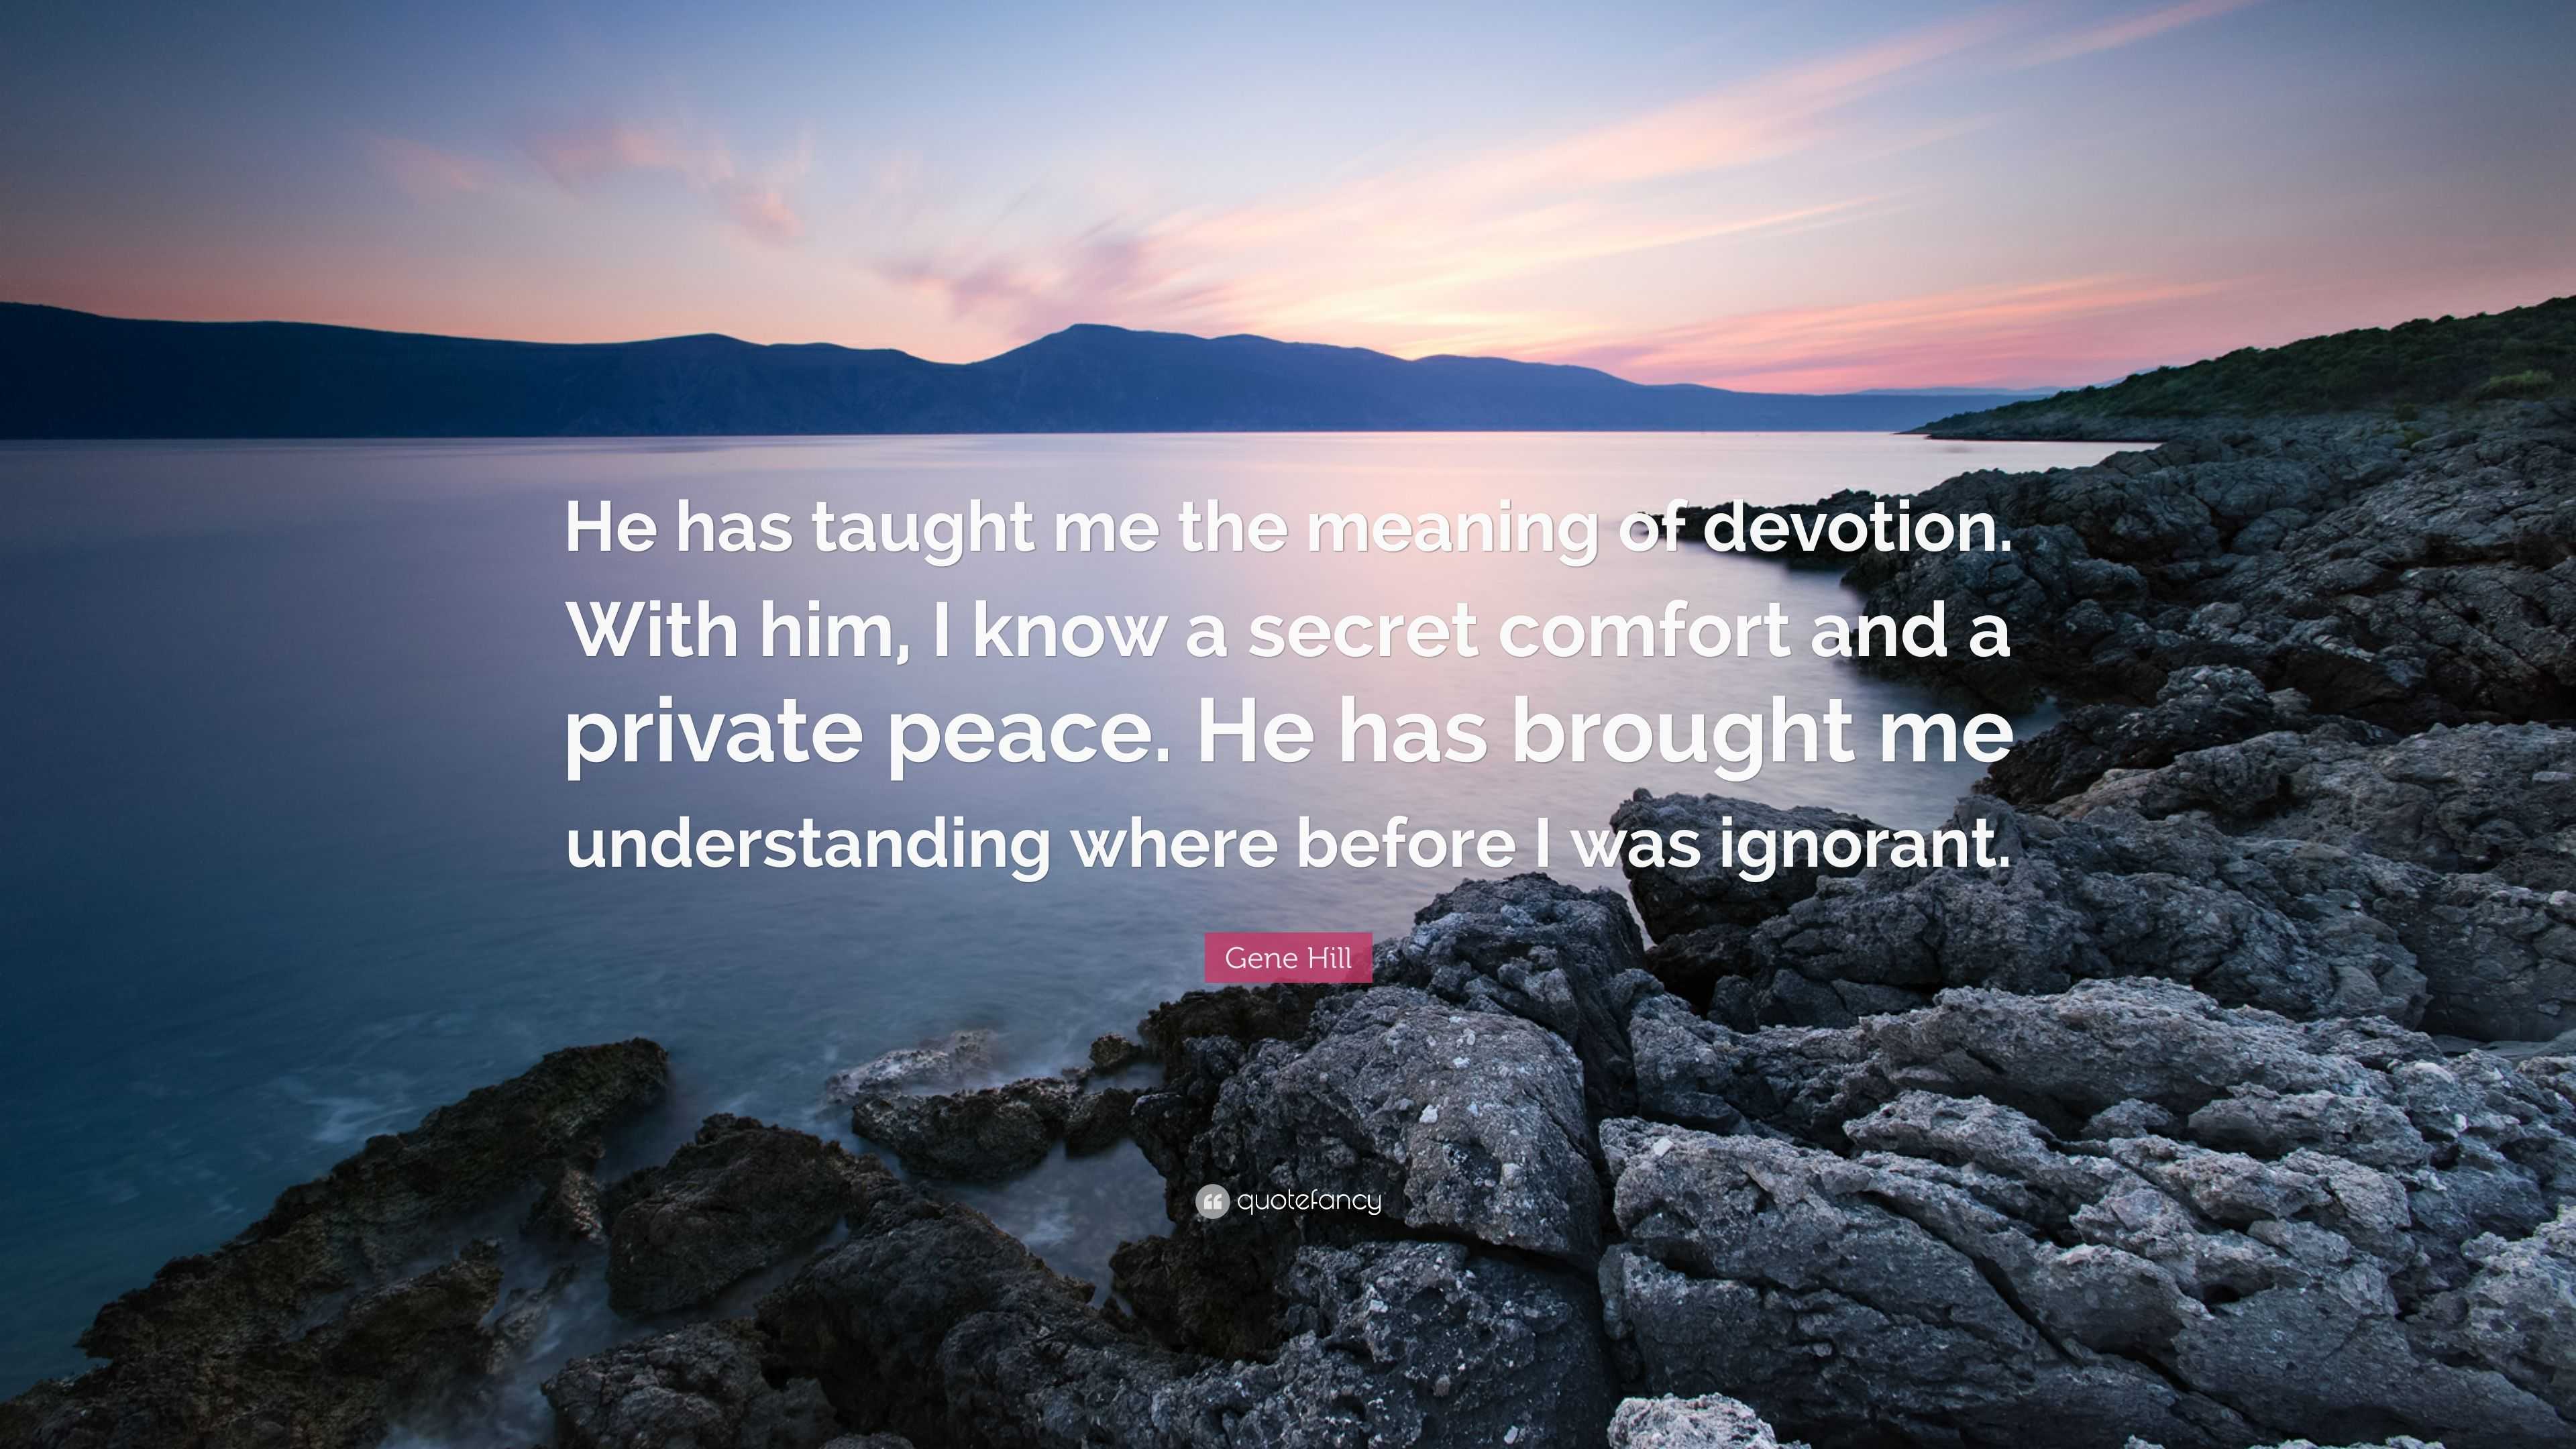 Gene Hill Quote: “He has taught me the meaning of devotion. With him, I  know a secret comfort and a private peace. He has brought me under...”